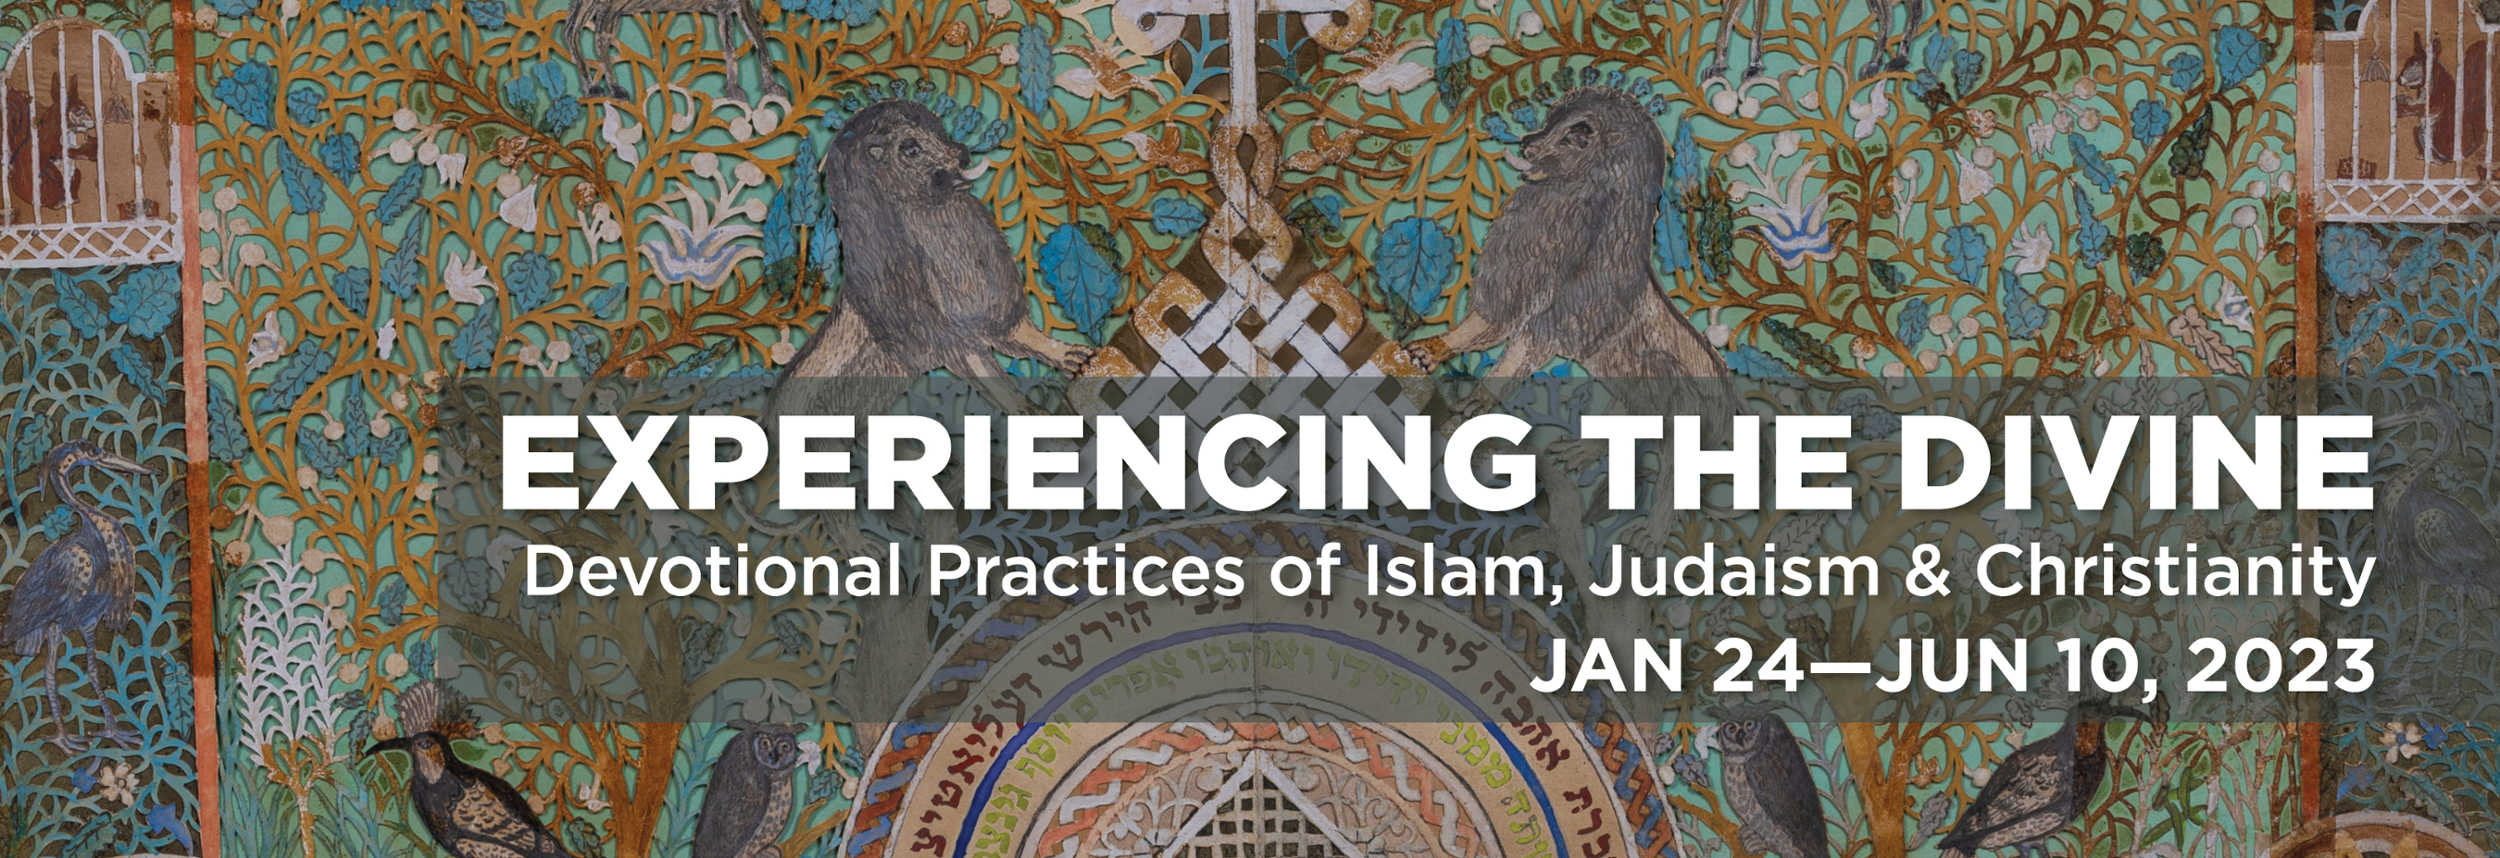 Experiencing the Divine: Devotional Practices of Islam, Judaism, and Christianity title art